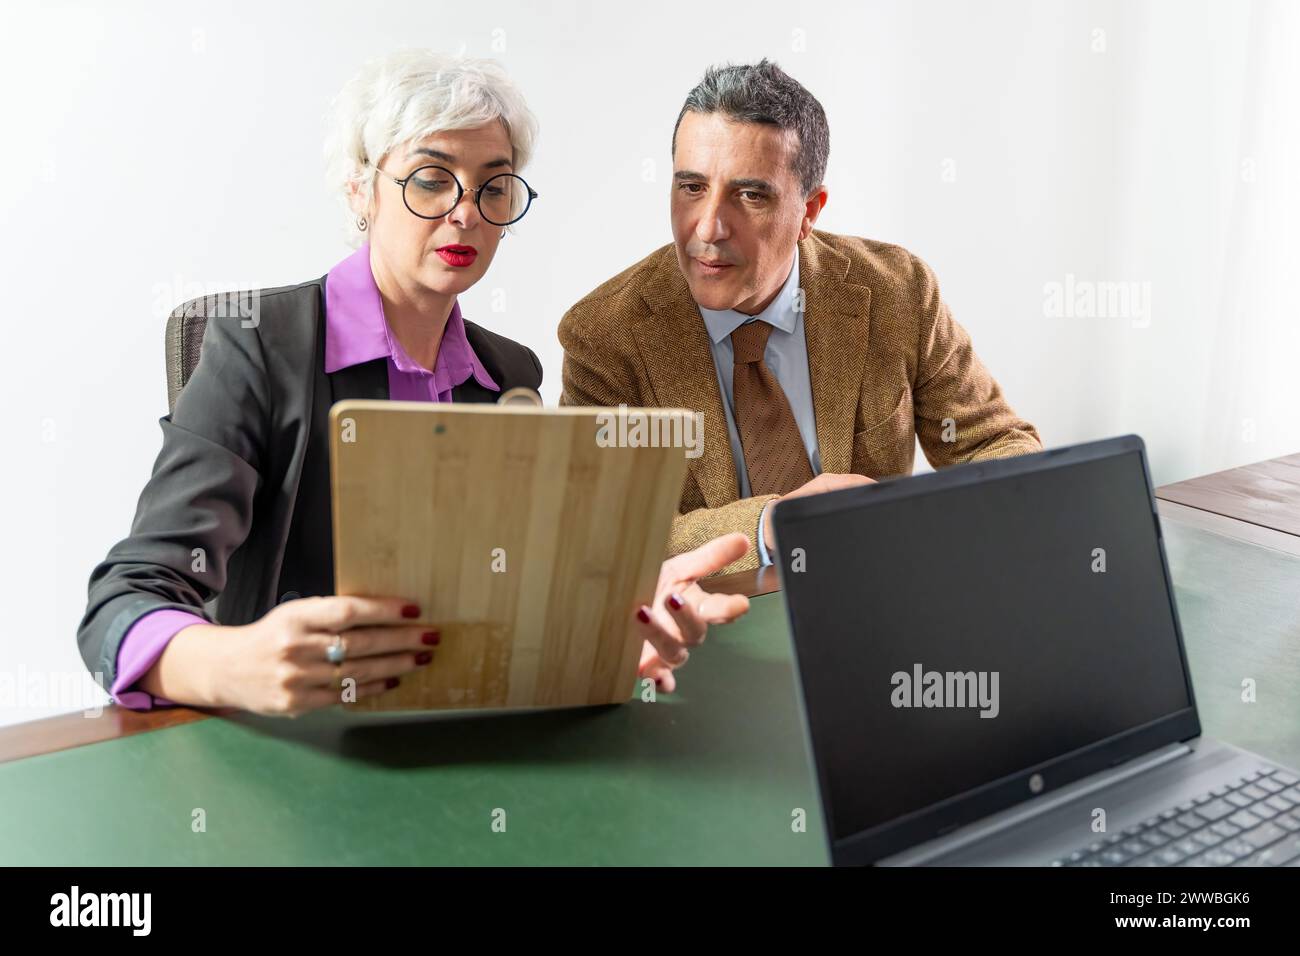 Two individuals - reviewing a contract on a clipboard before finalizing - intense focus on document details, pre-signing verification - legal consulta Stock Photo